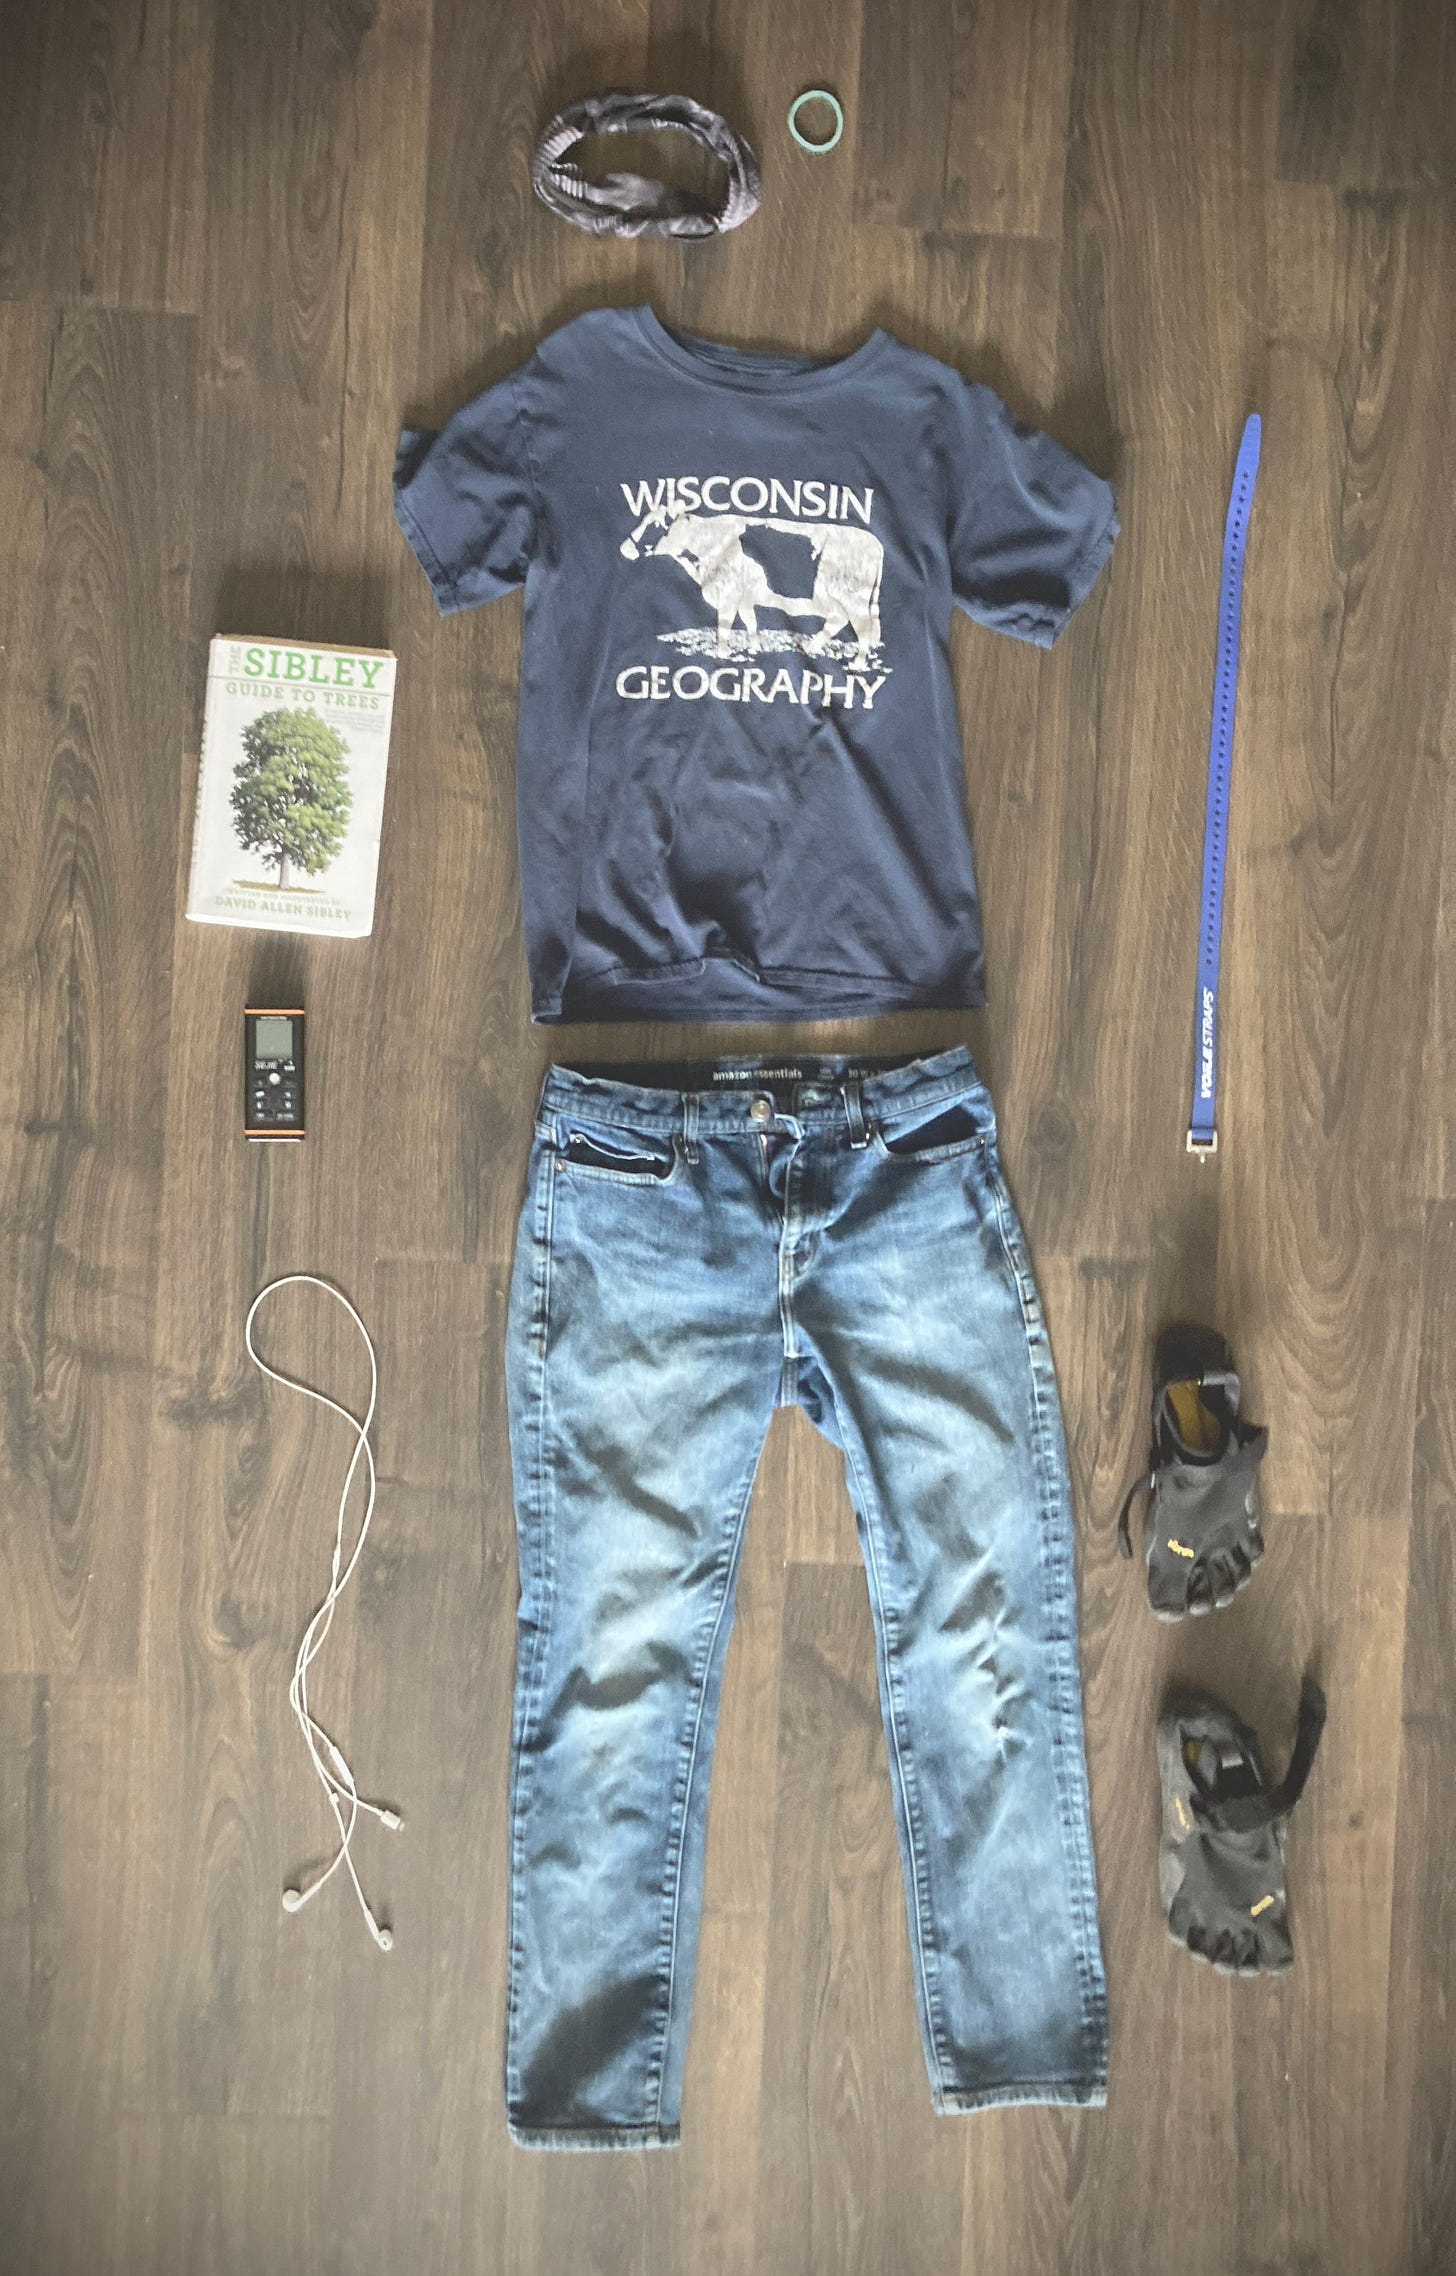 A photo of almost all the gear I will talk about: pants, shoes, shirt, laser ruler, book, etc.